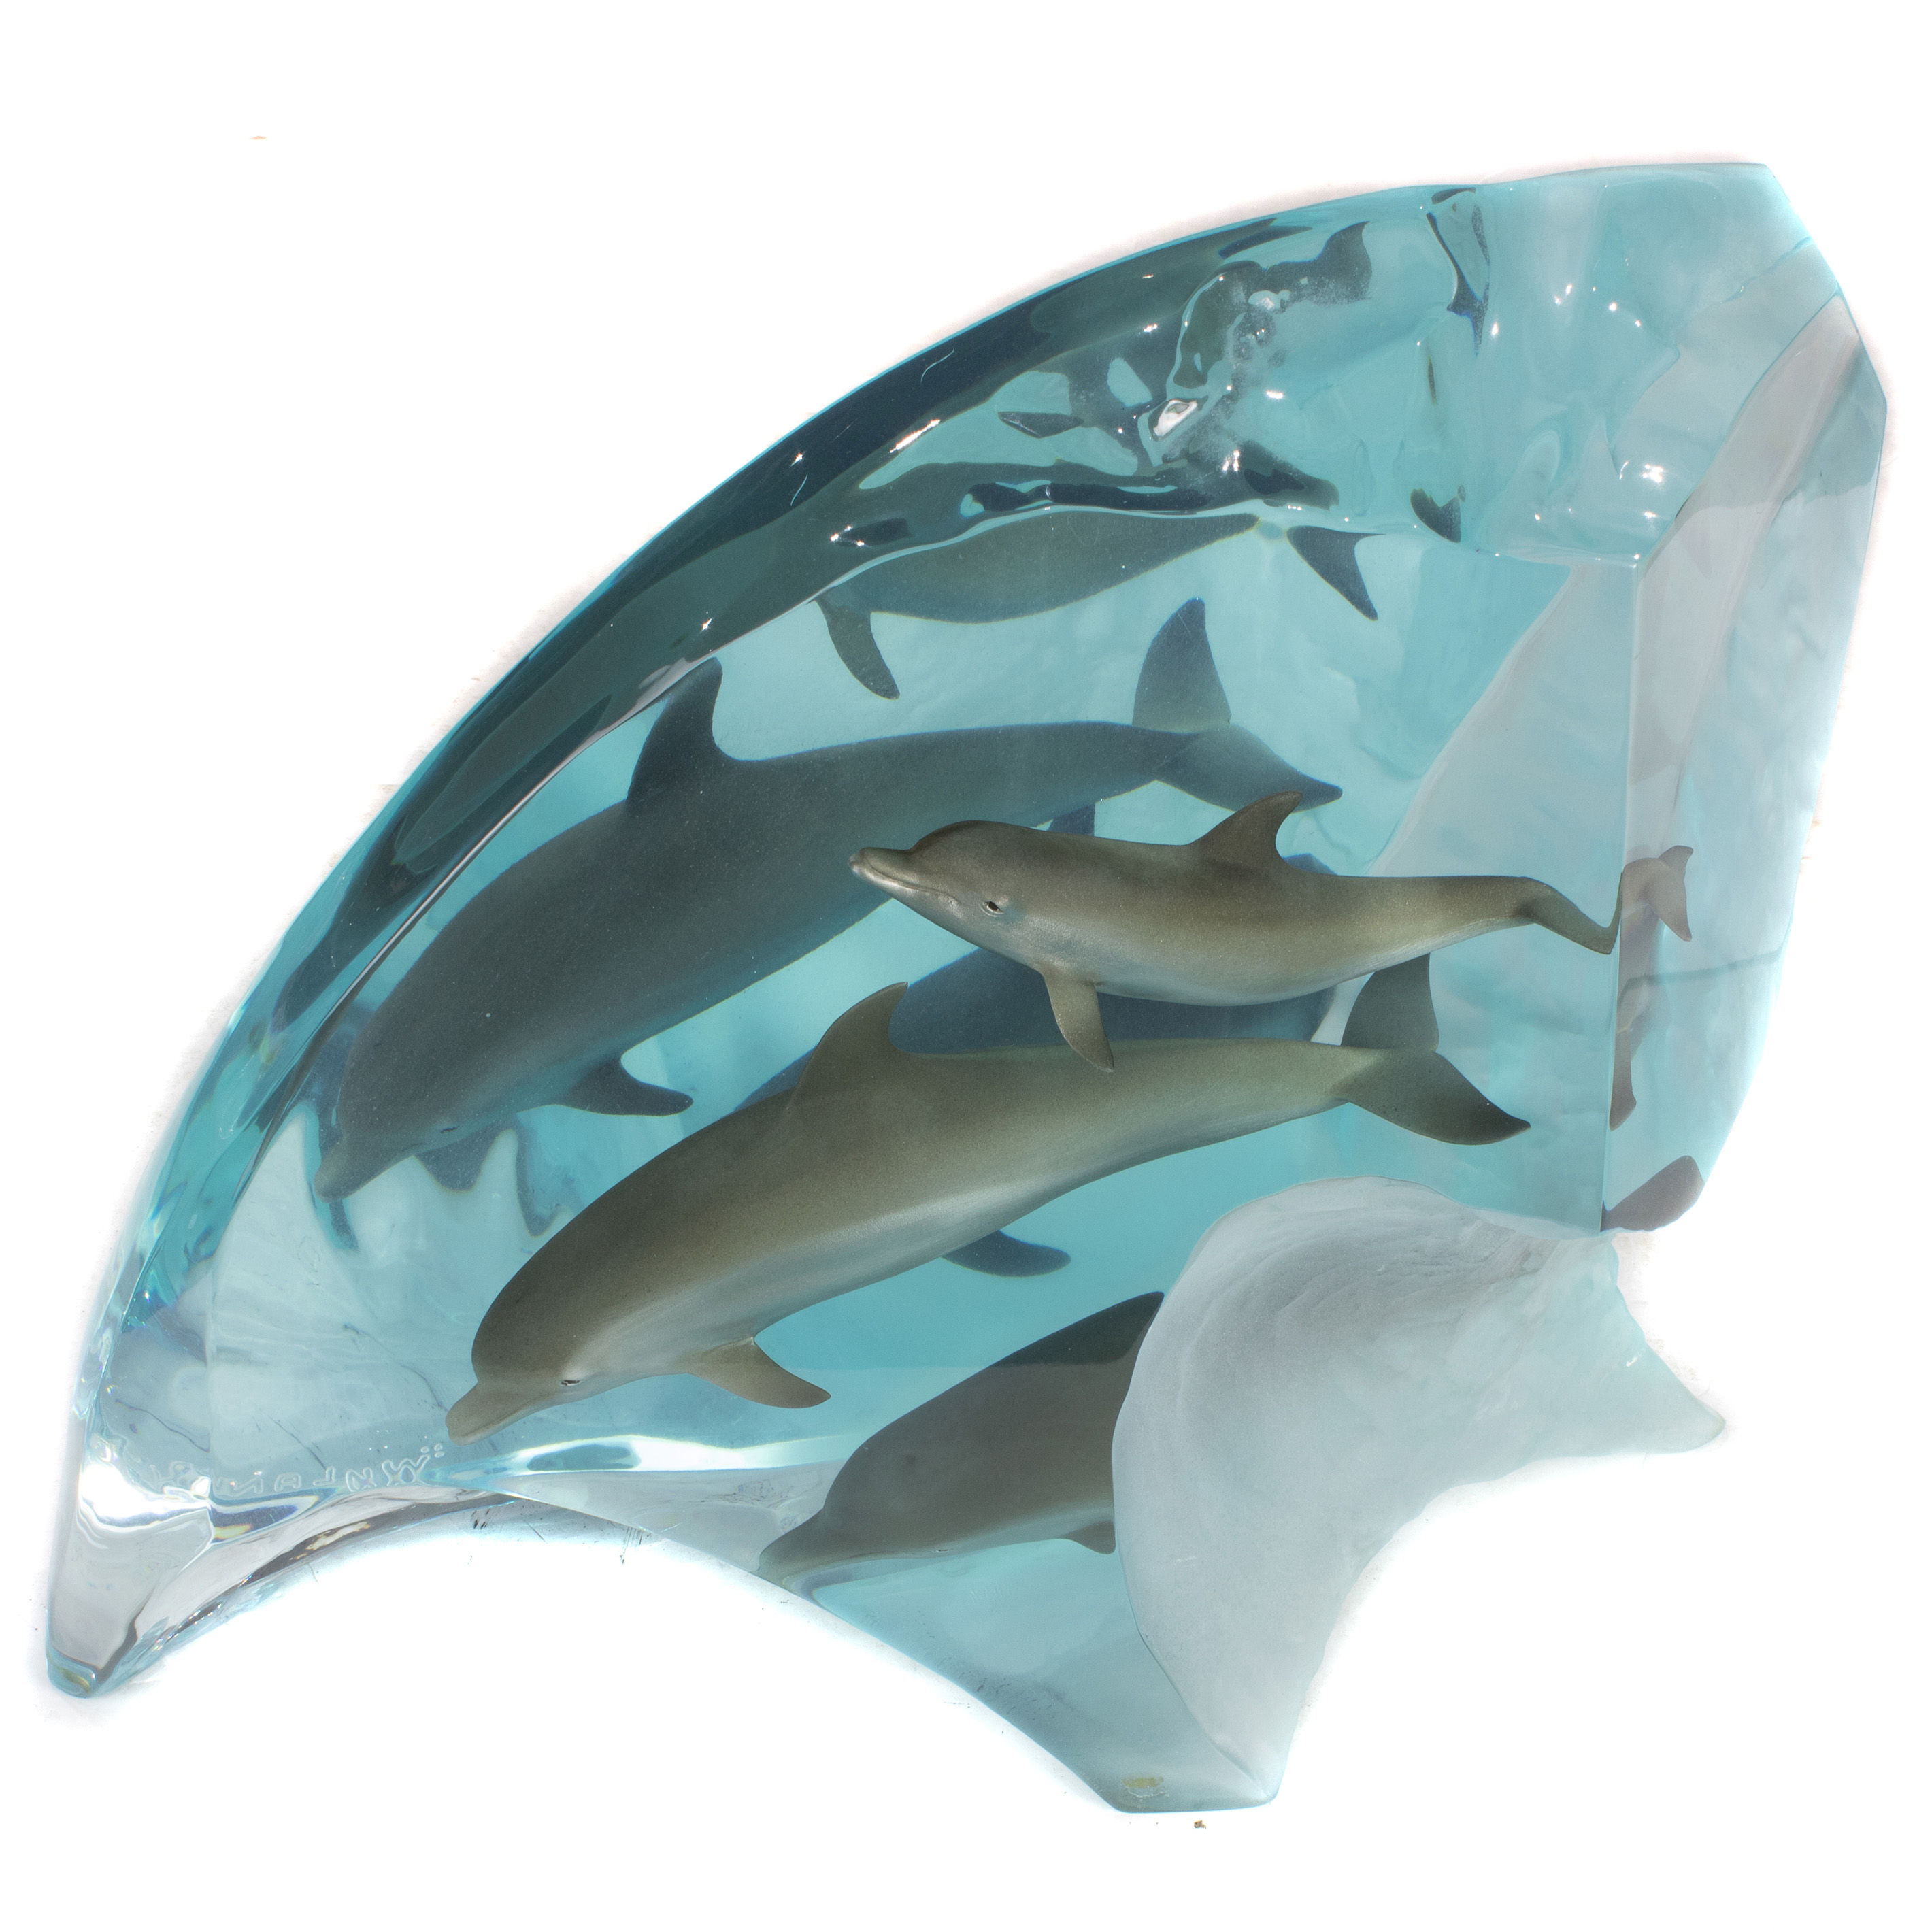 WYLAND ACRYLIC SCULPTURE OF DOLPHINS